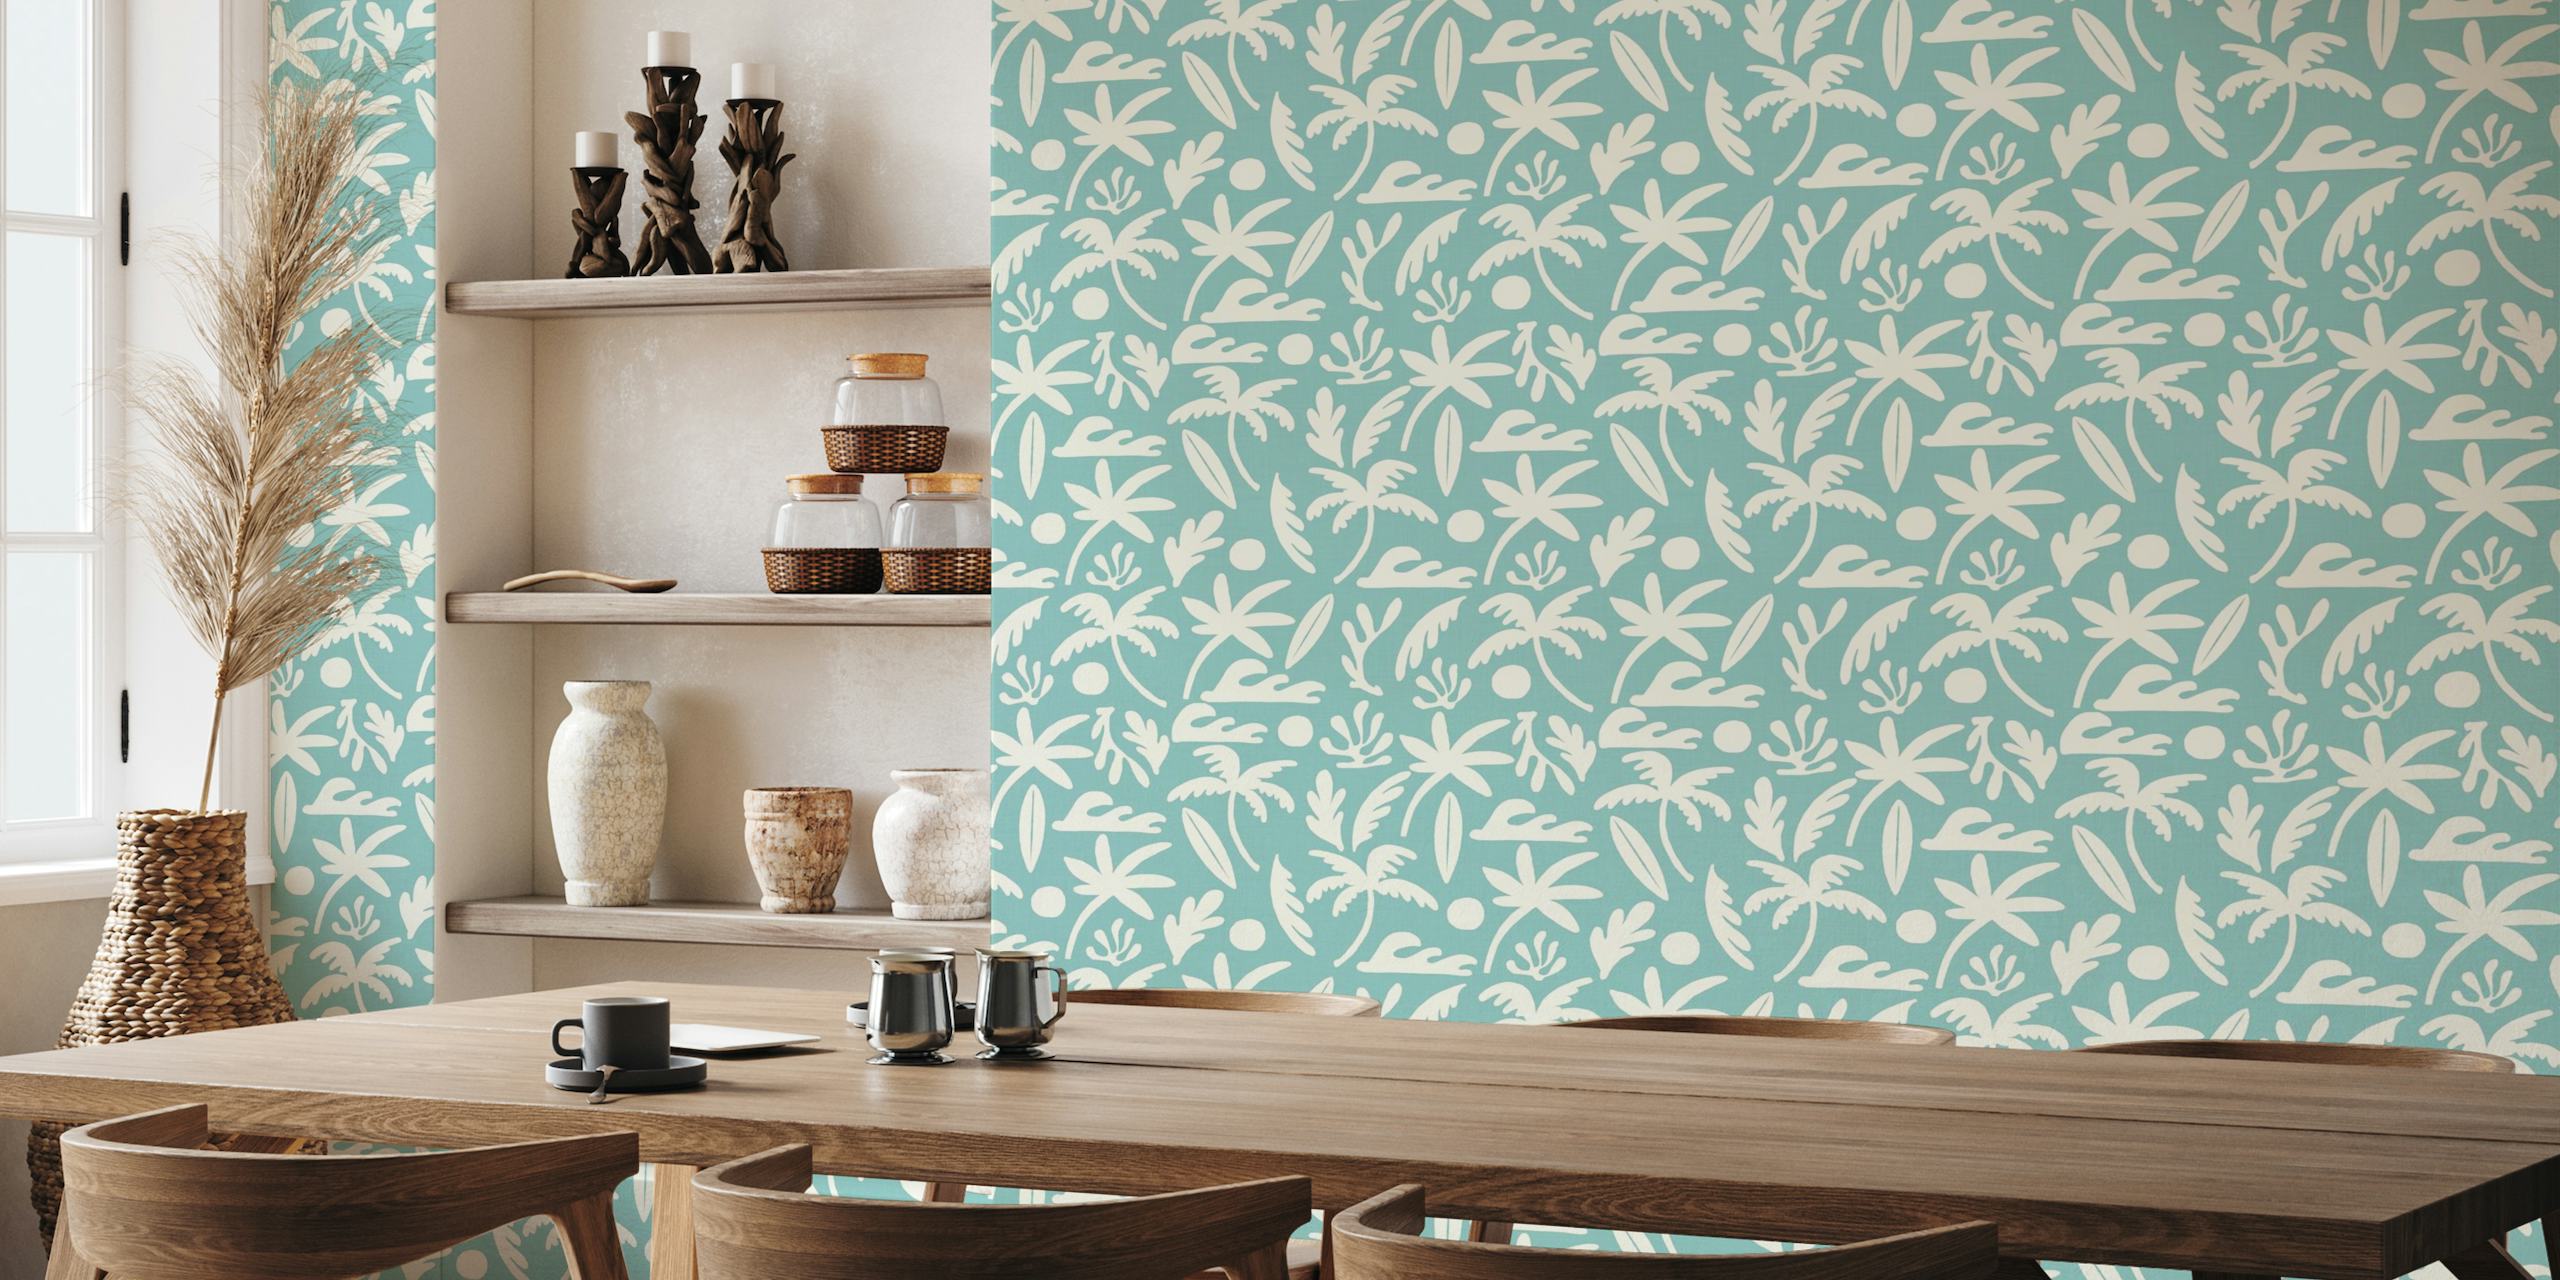 Vintage blue surf-inspired pattern wall mural depicting stylized waves and coastal motifs